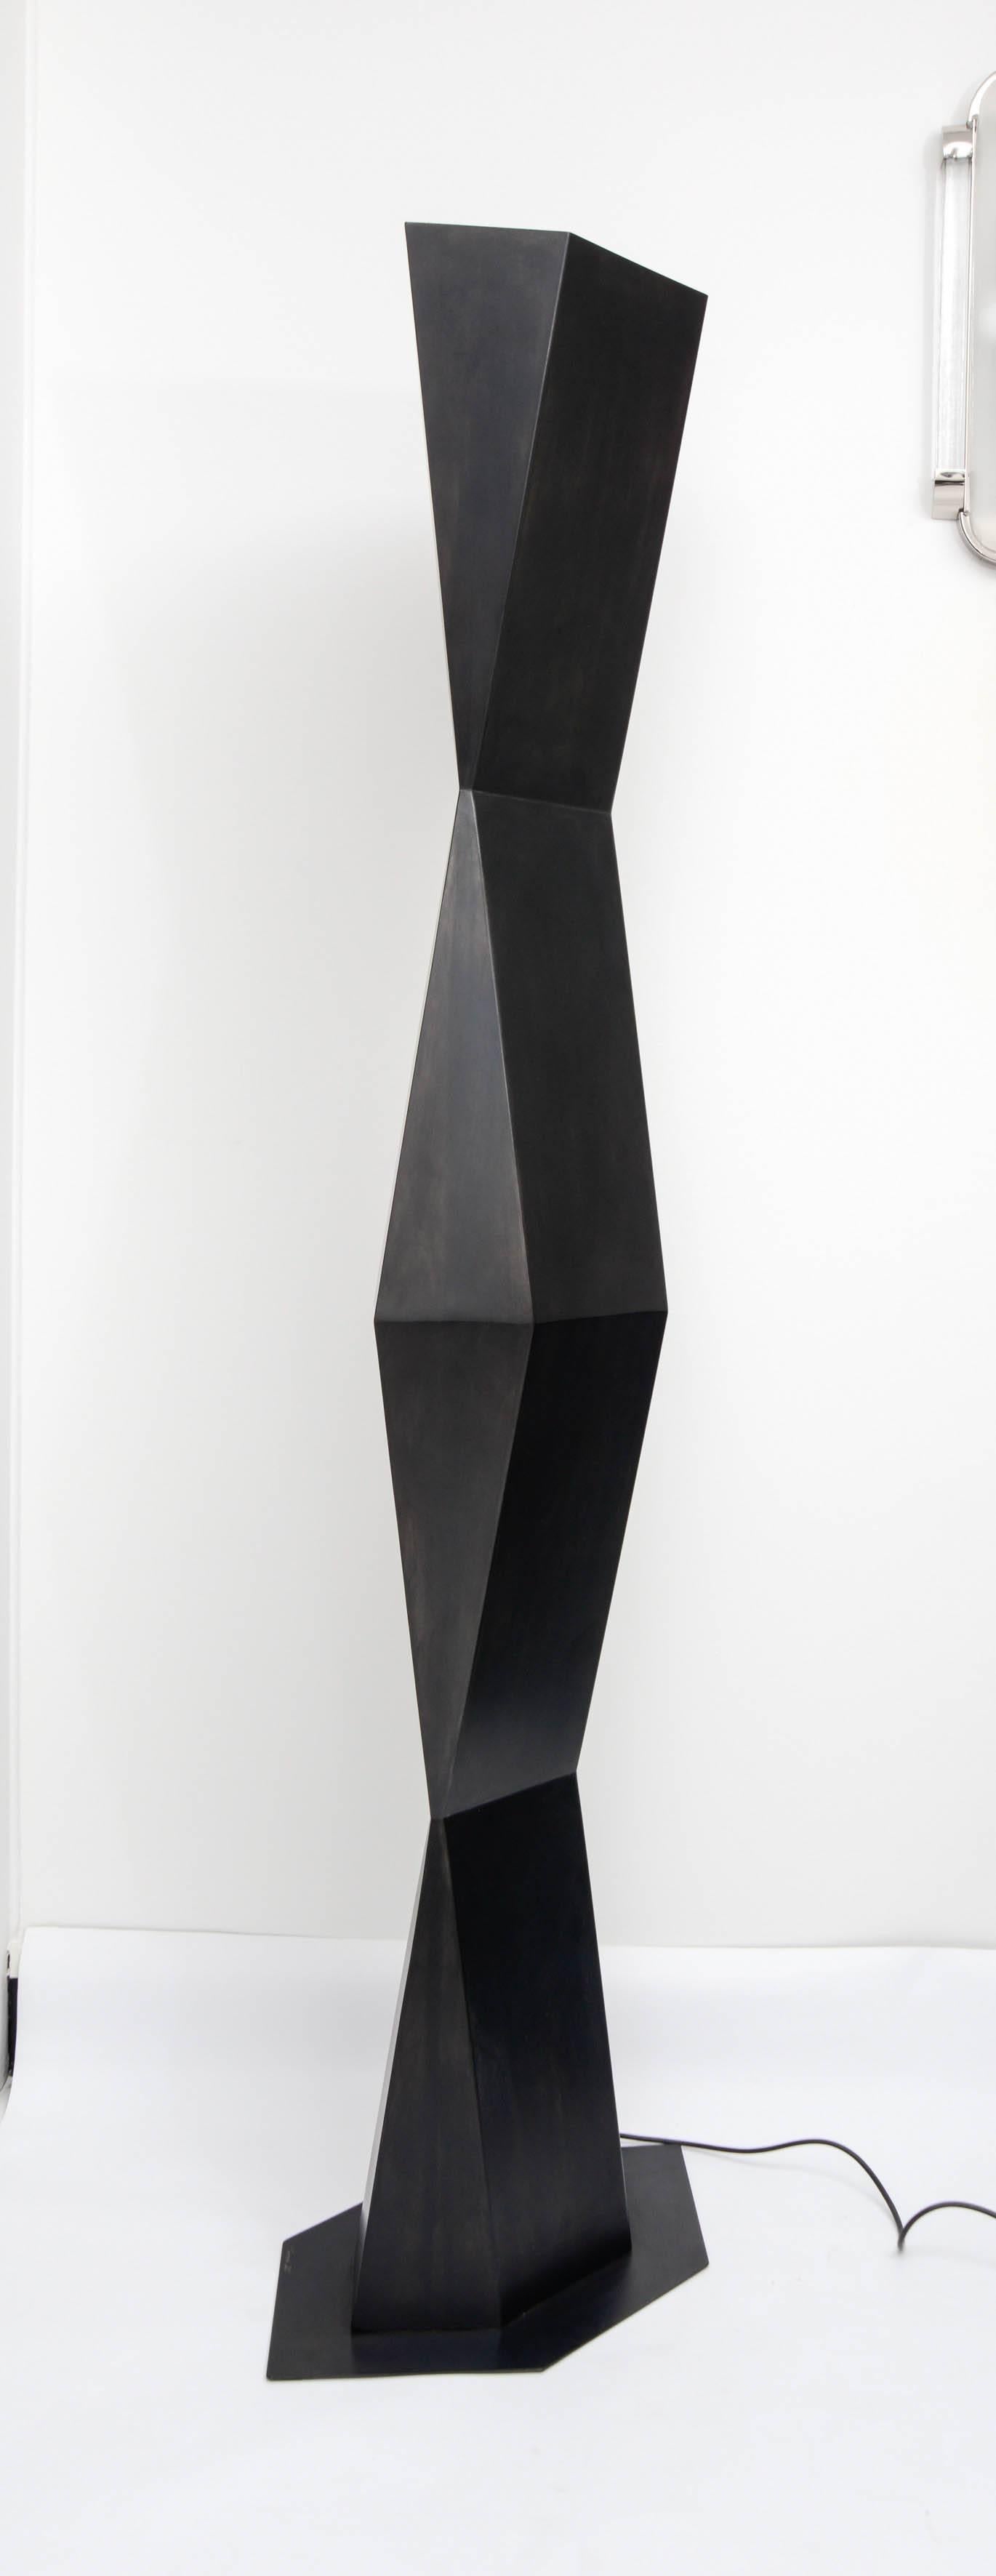 Floor lamp TOTEM by Stephane Ducatteau. Geometrical design, in oxidized steel and darkened patina. This line is an exclusive creation for Fortuna Modernism. Each piece is signed.
This one is a unique piece on this size.
   